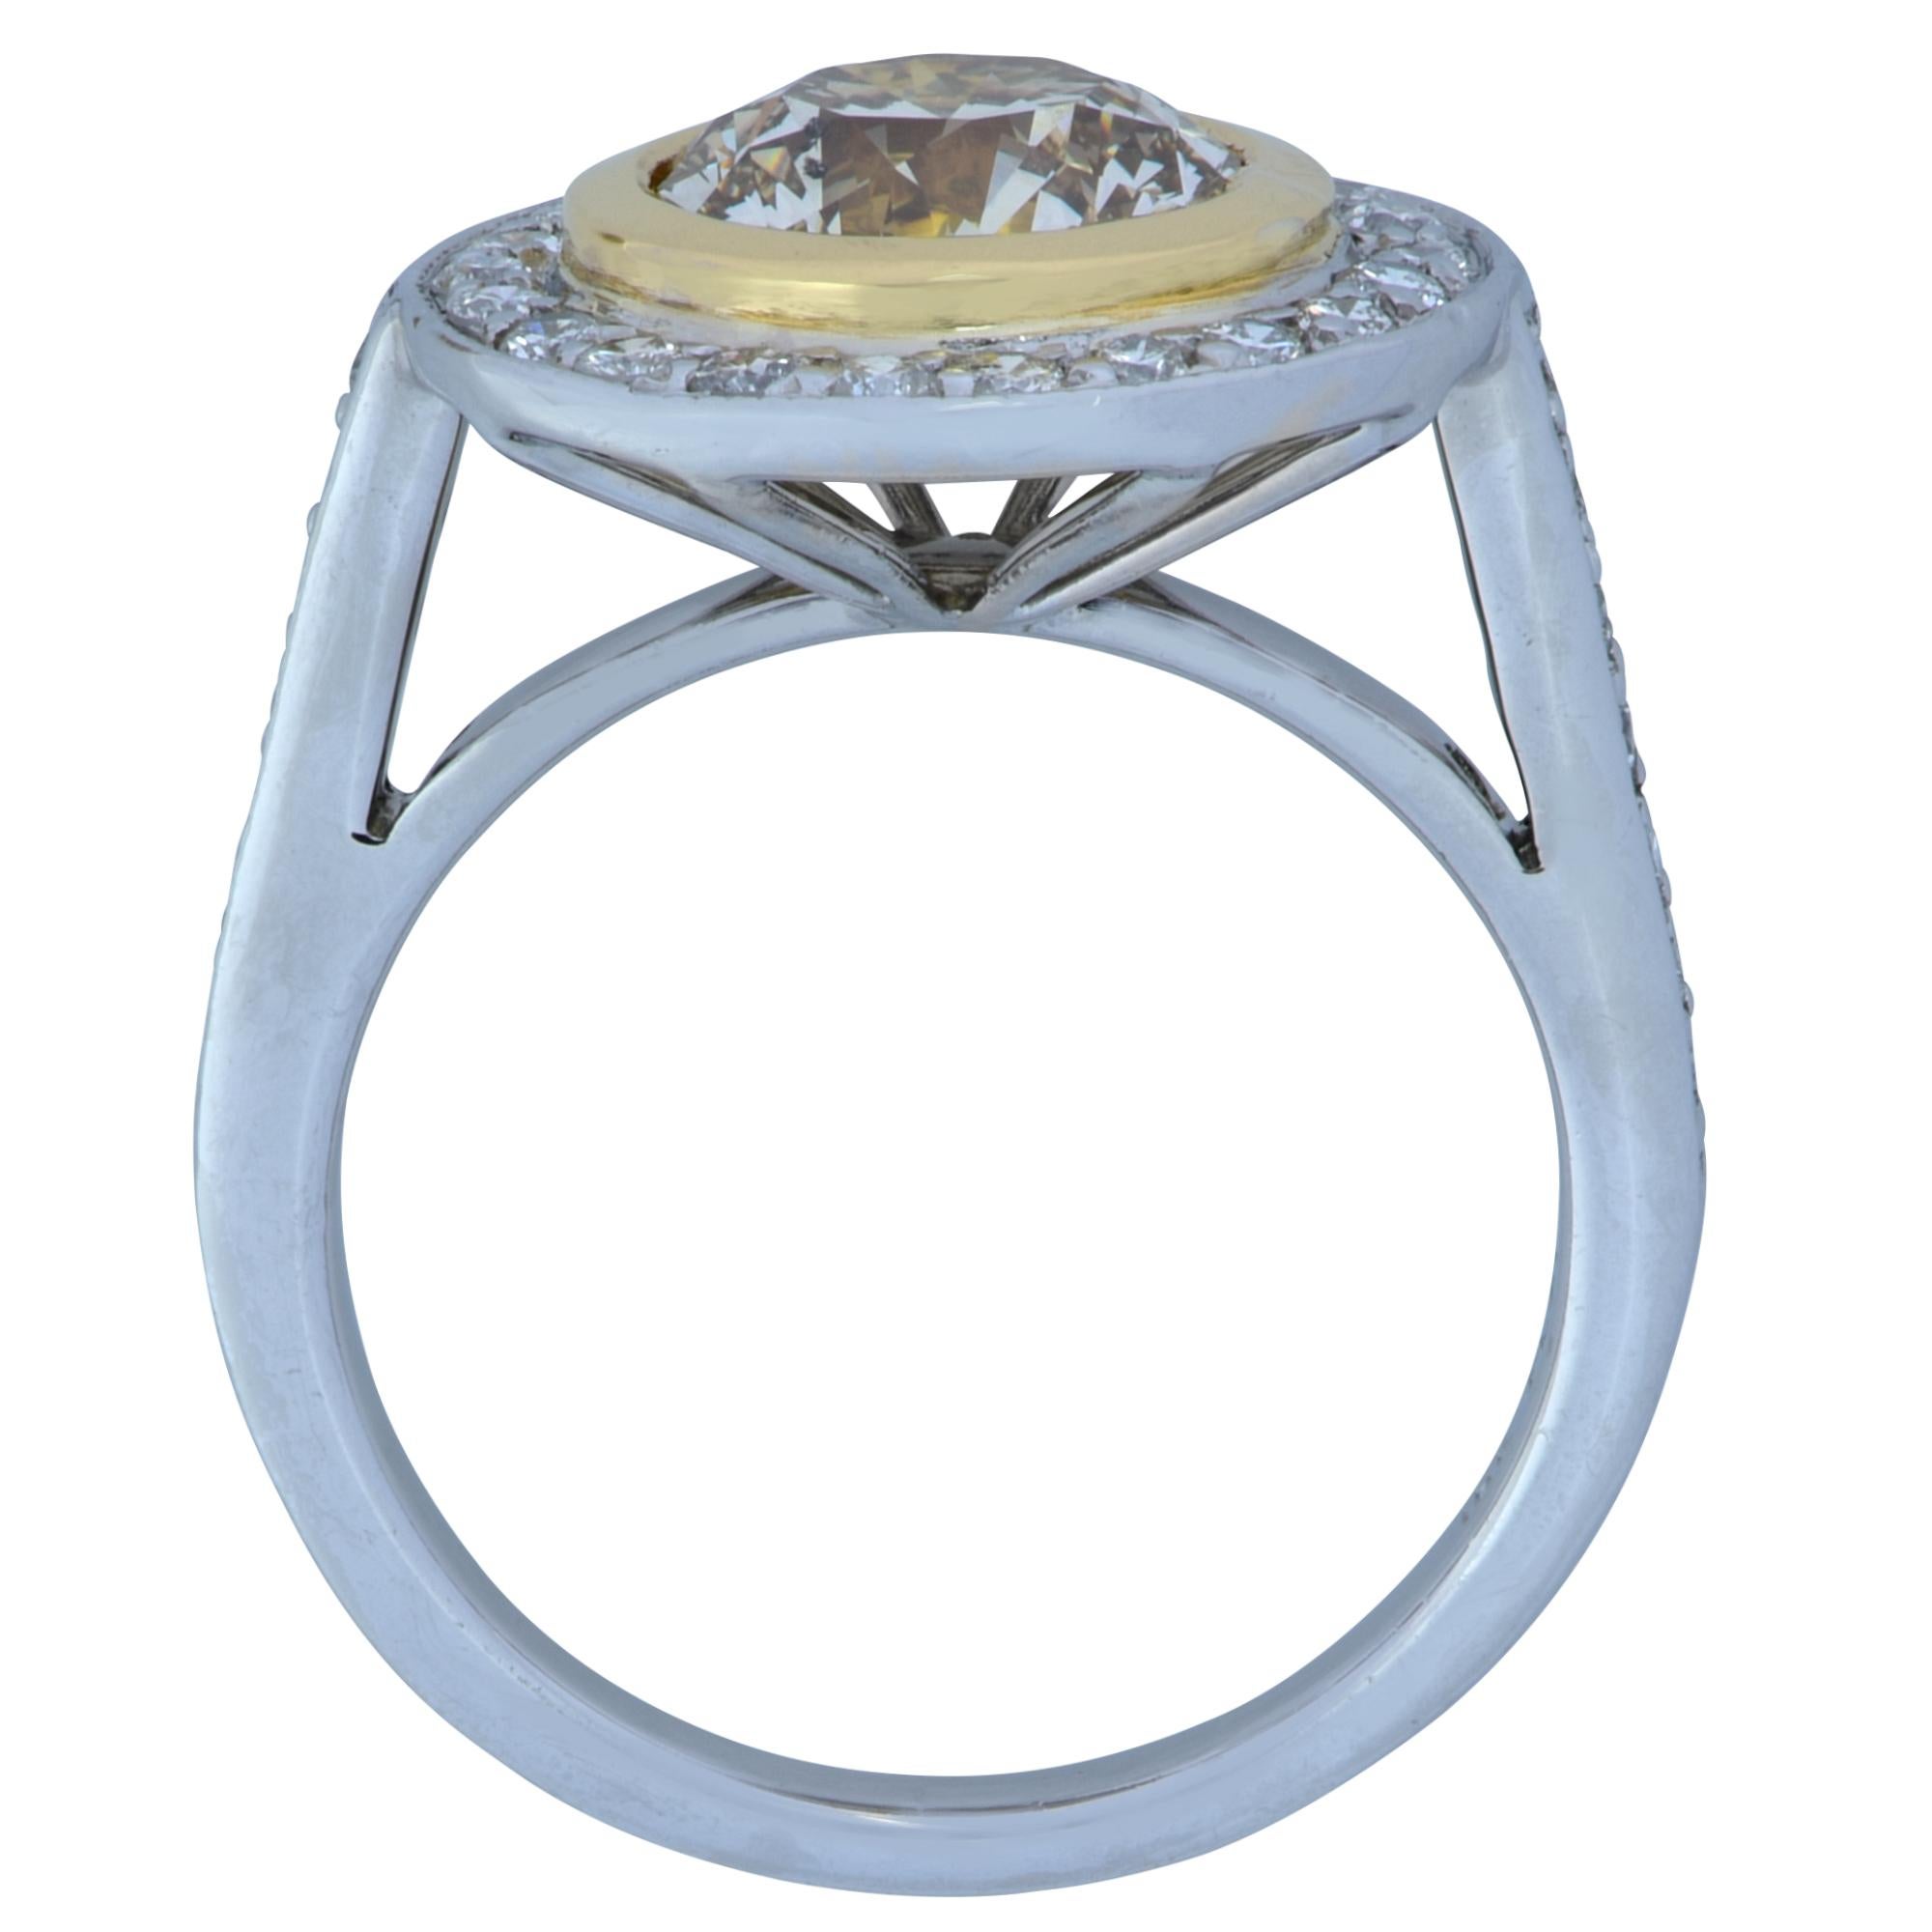 Stunning ring crafted in platinum and 18 karat yellow gold, featuring a cognac color round brilliant cut diamond weighing approximately 2.15 carats, surrounded by 35 round brilliant cut diamonds G-H color, VS Clarity. The center diamond is set in an